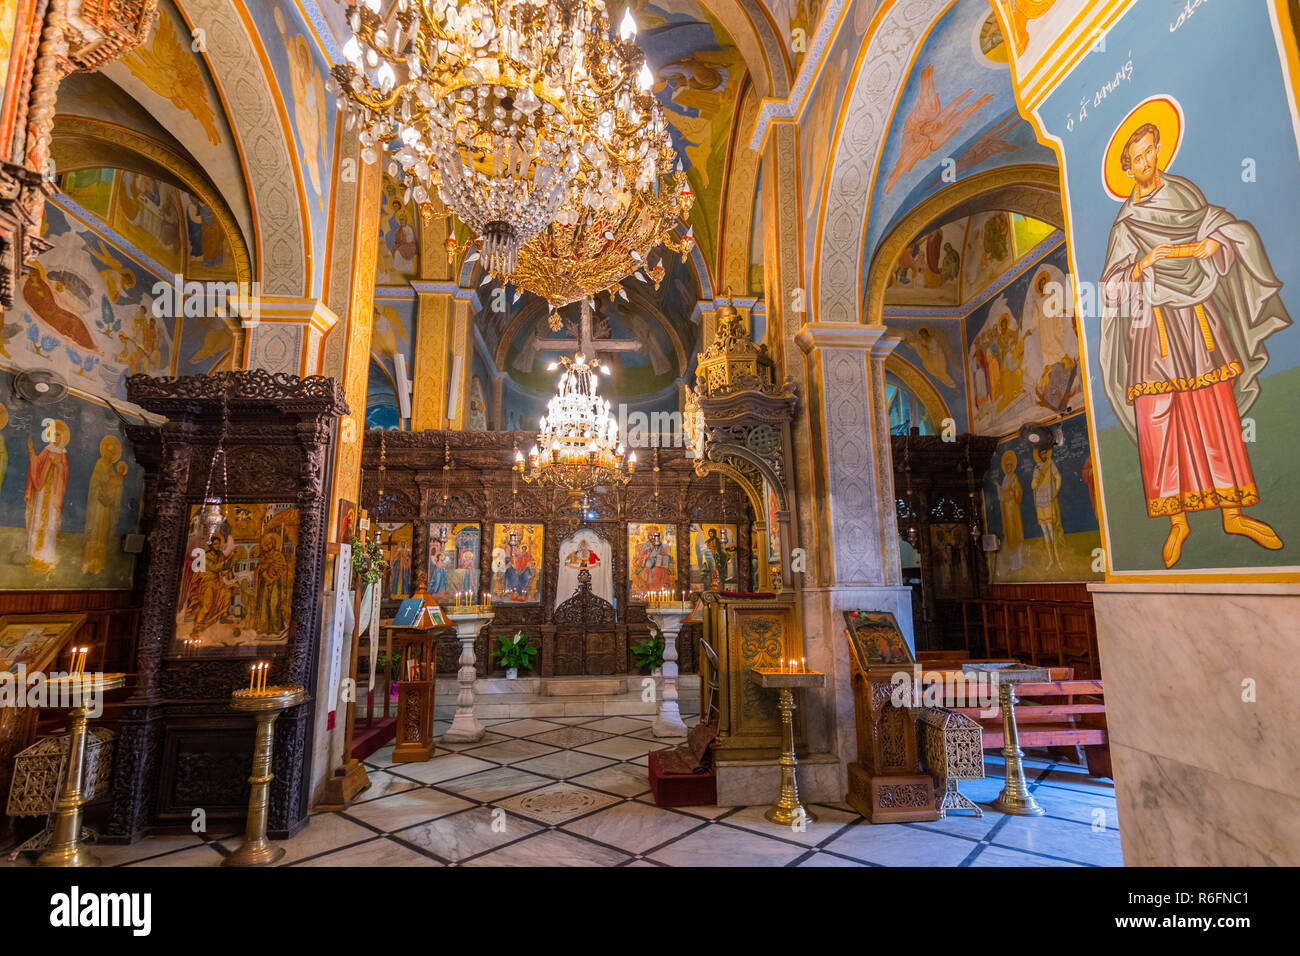 Interior Of The Greek Orthodox Church Of The Annunciation In Nazareth, Israel Stock Photo - Alamy